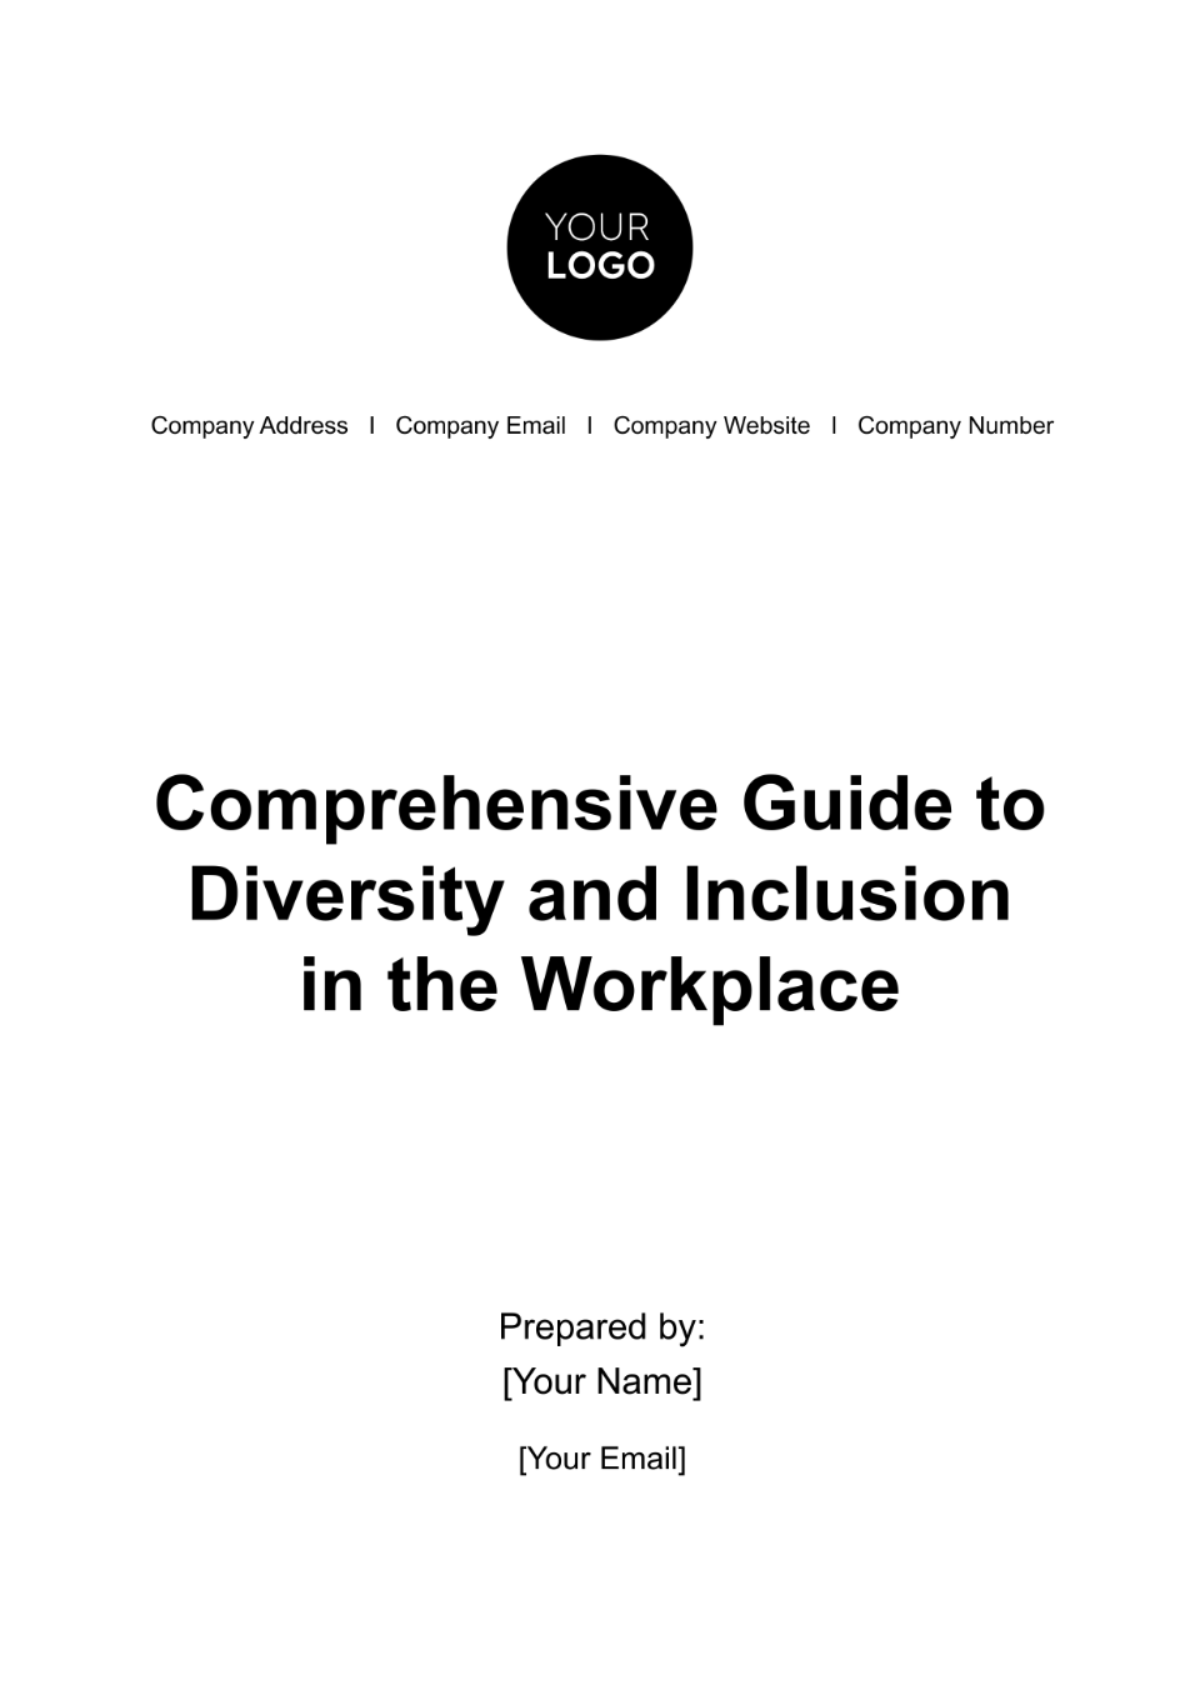 Comprehensive Guide to Diversity and Inclusion in the Workplace HR Template